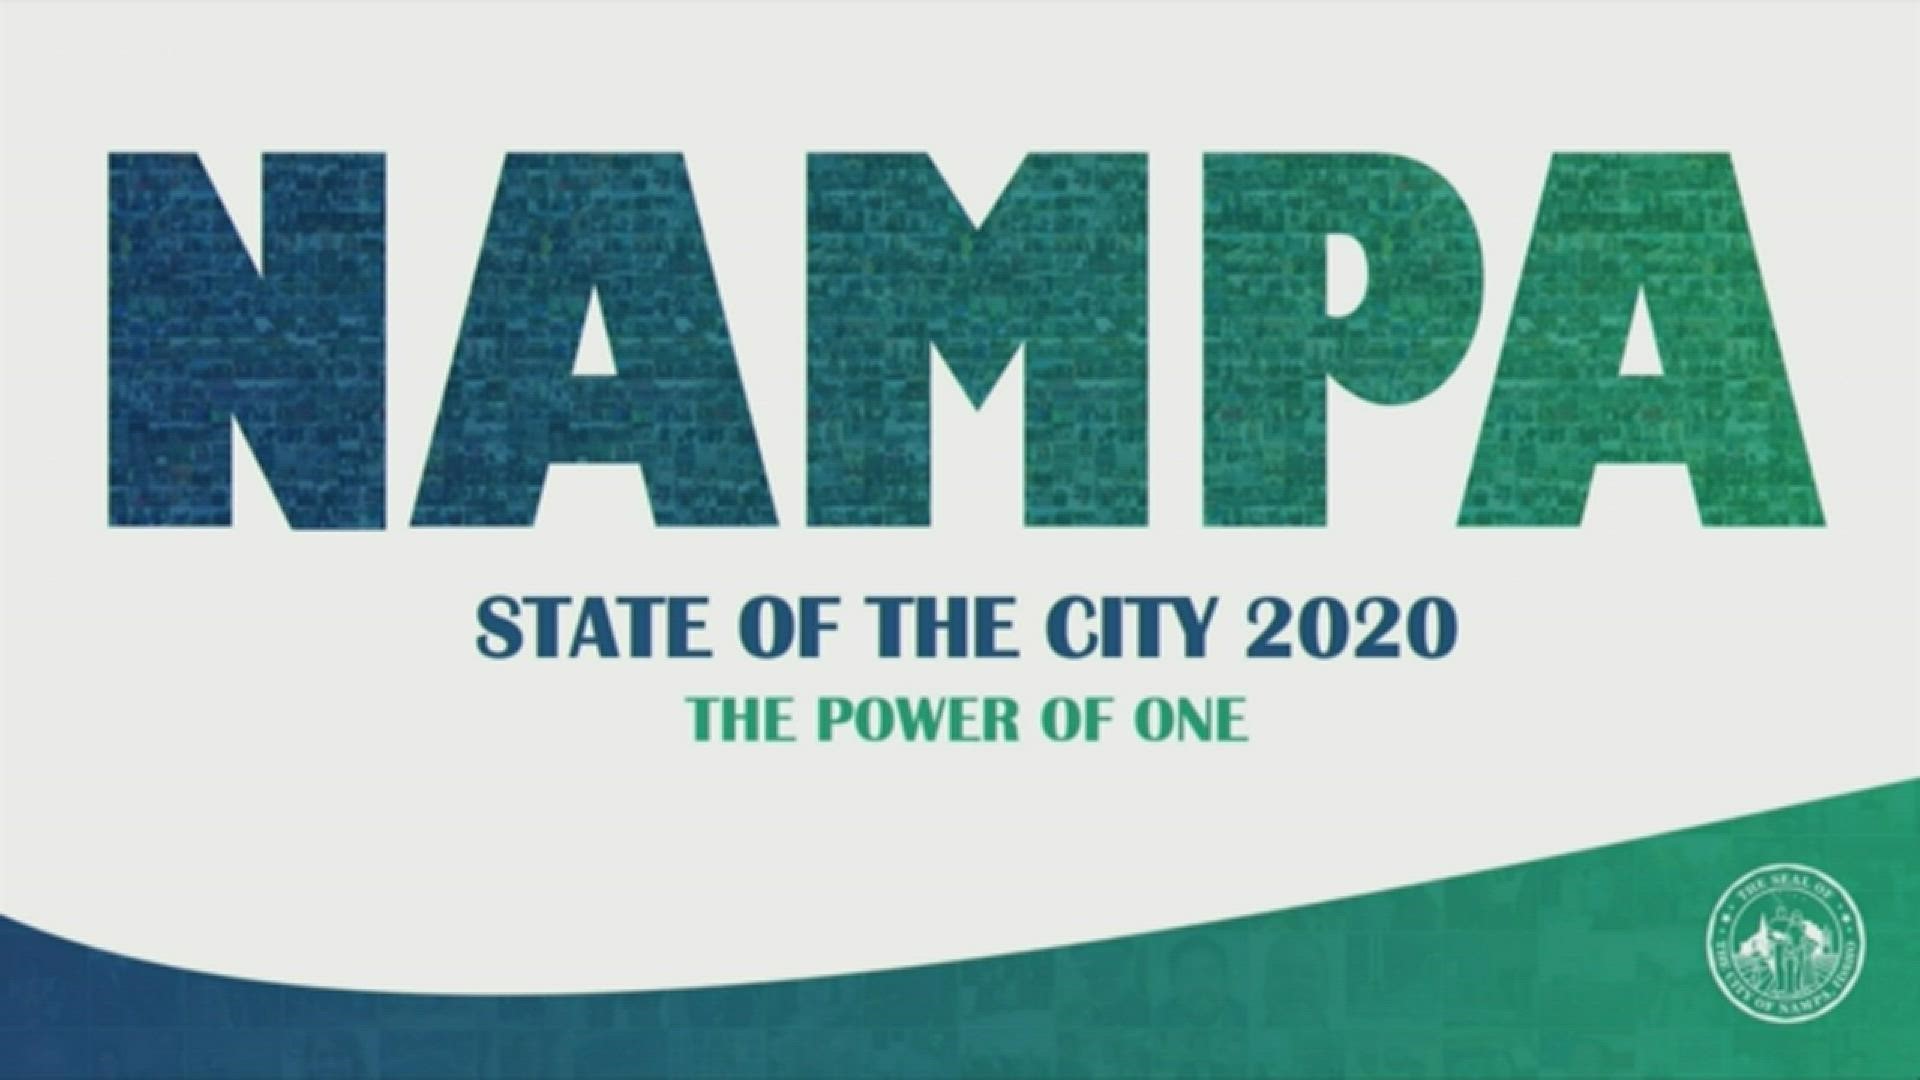 Nampa Mayor Debbie Kling delivered her State of the City address on Thursday, March 12, 2020. Watch the full address here.